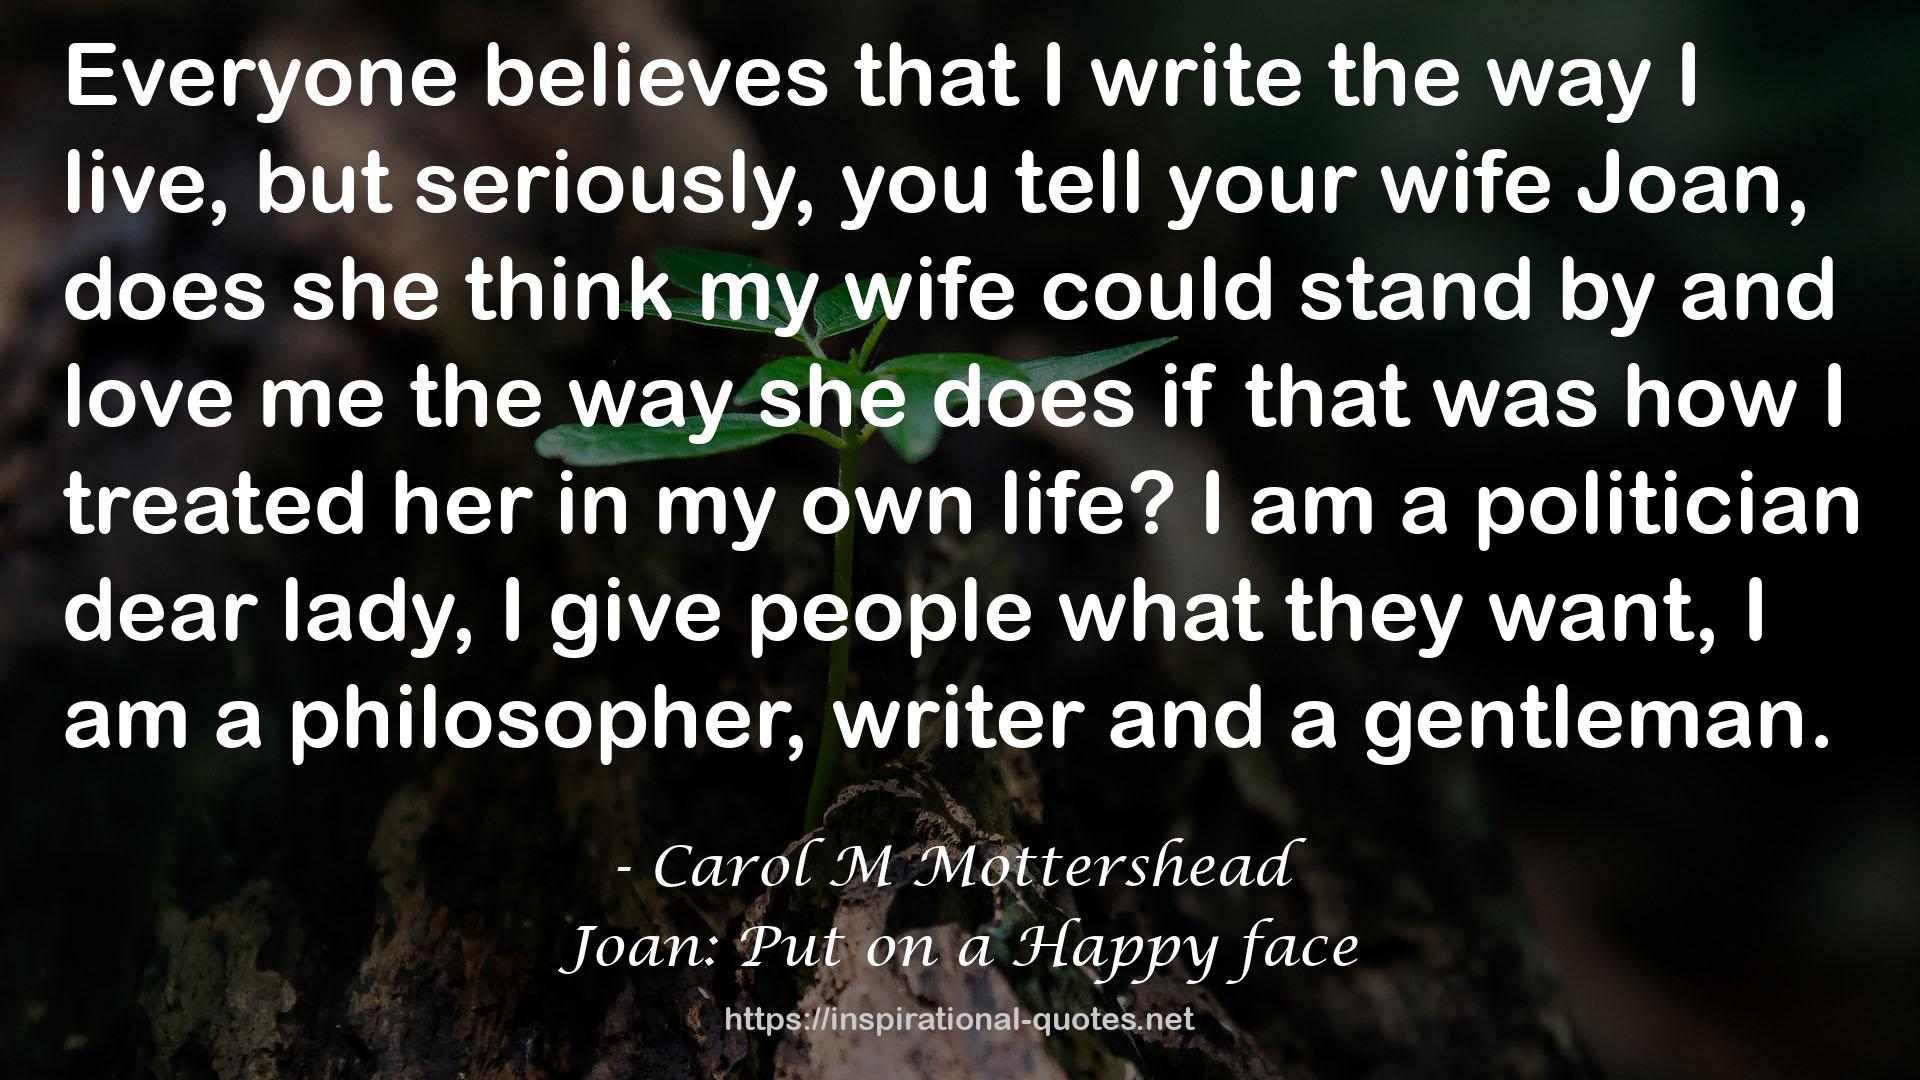 Joan: Put on a Happy face QUOTES